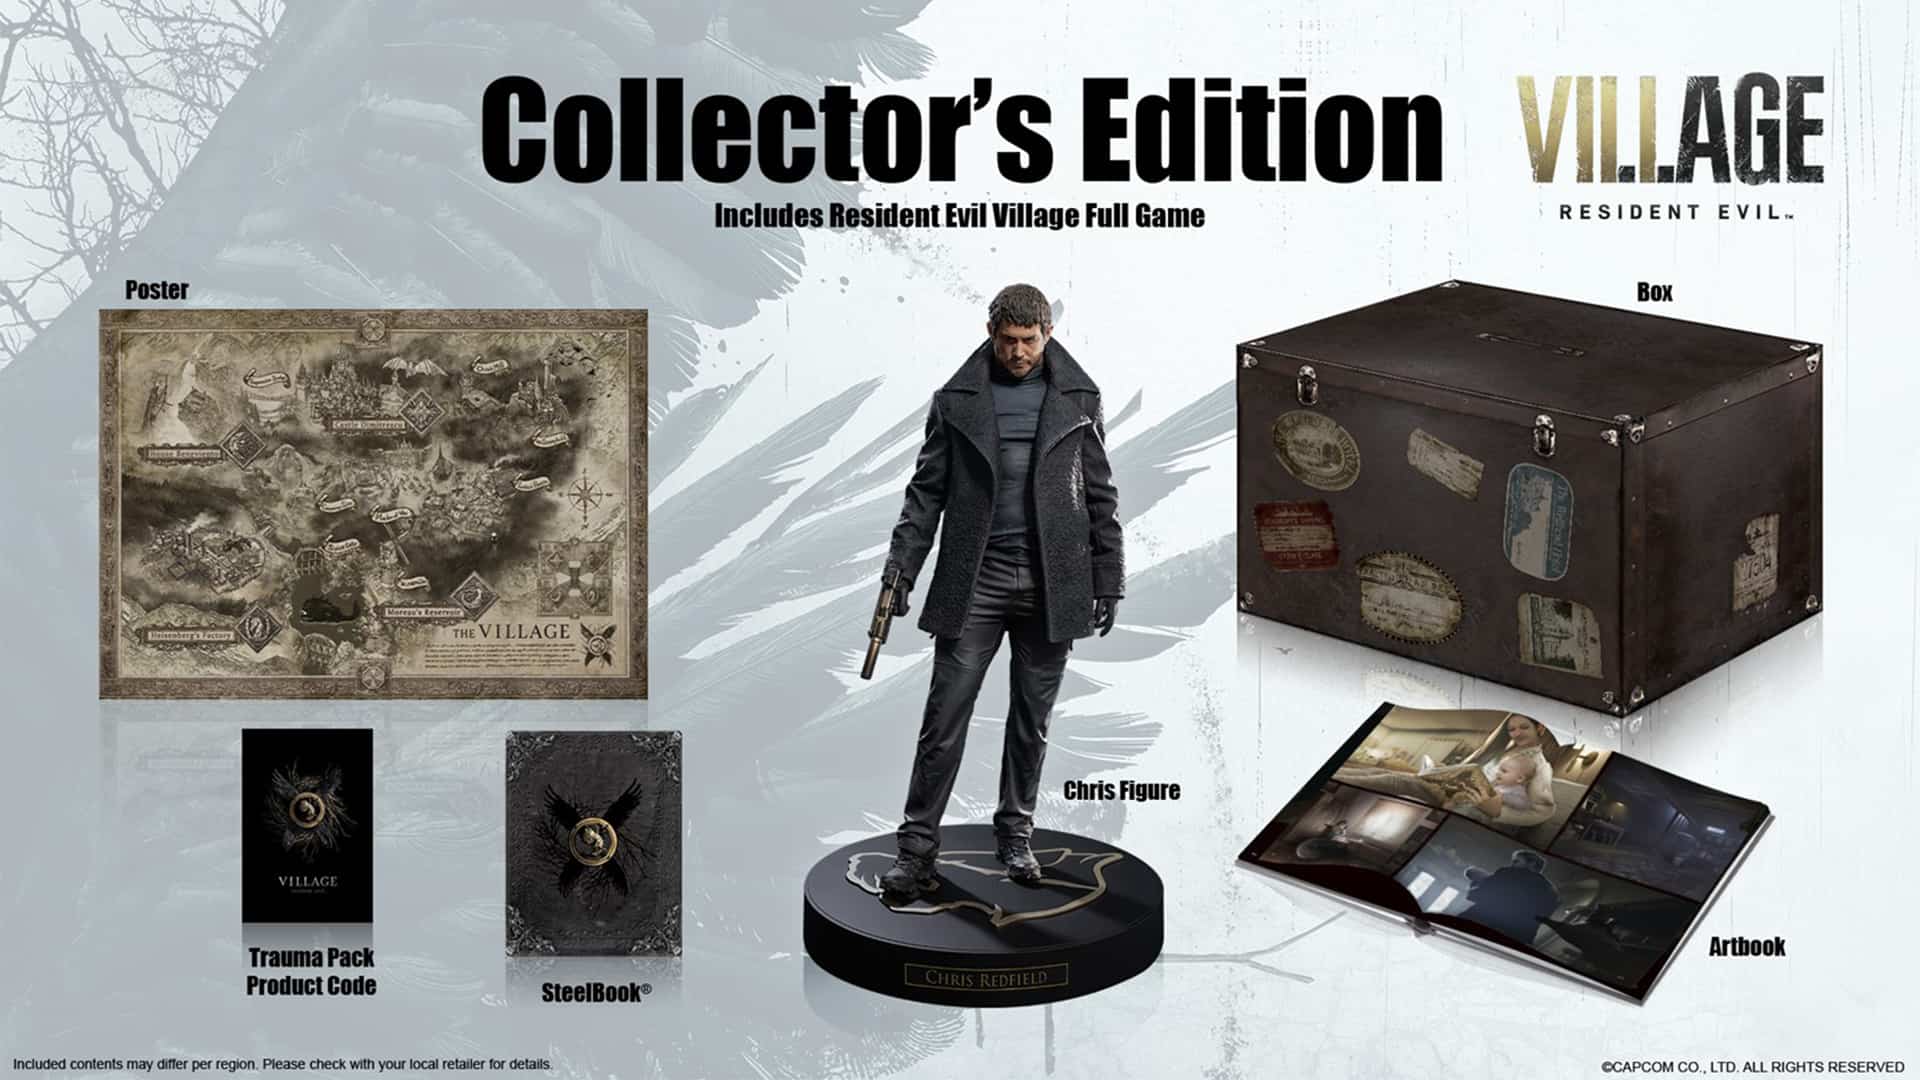 Unboxing The Resident Evil Village Collector's Edition on PS5